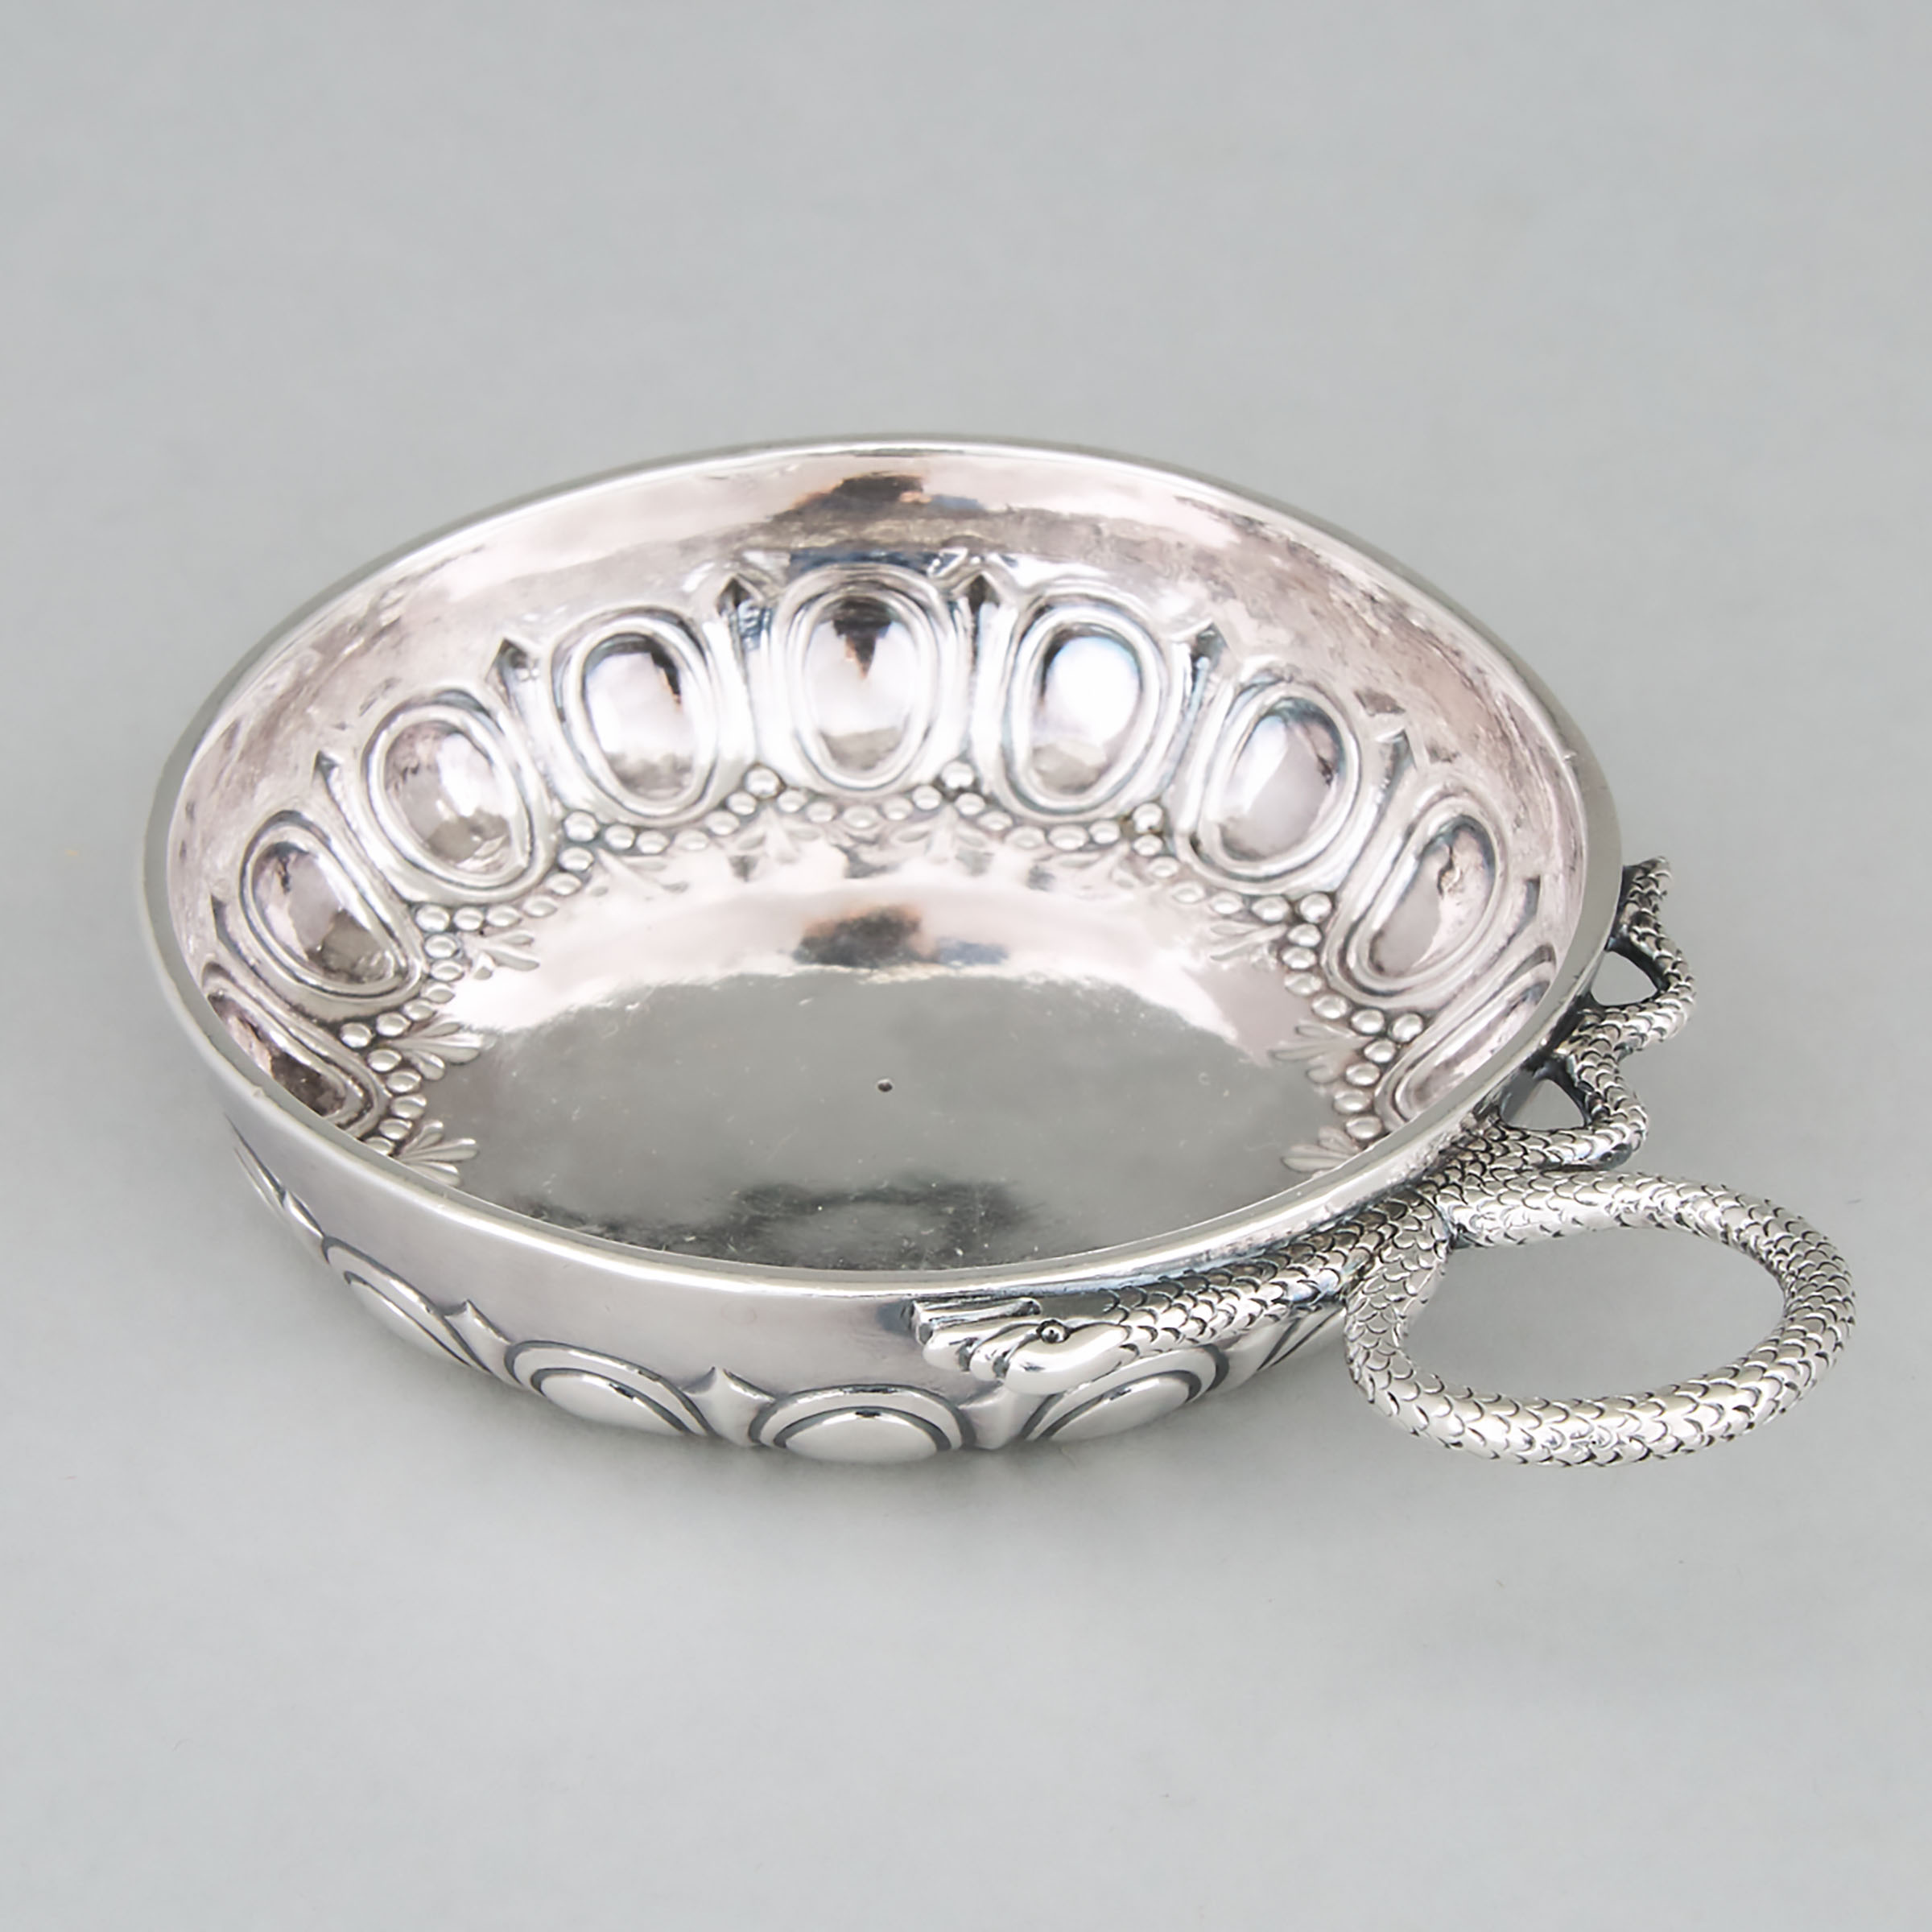 French Silver Wine Taster, early 19th century